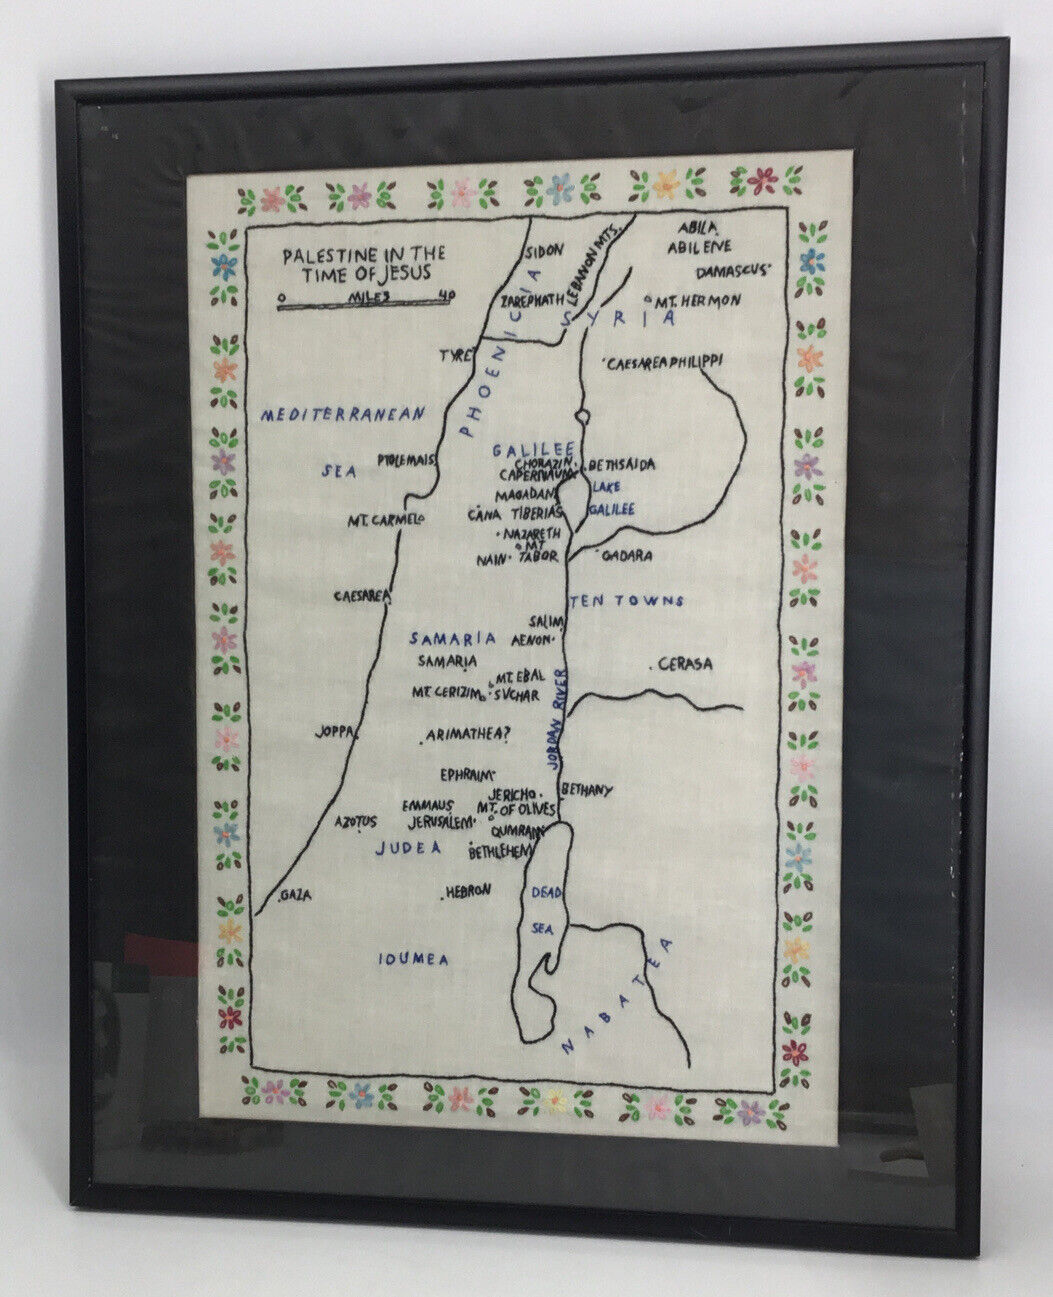 MAP OF PALESTINE IN THE TIME OF JESUS EMBROIDERED ON COTTON UNIQUE CHRISTIANITY